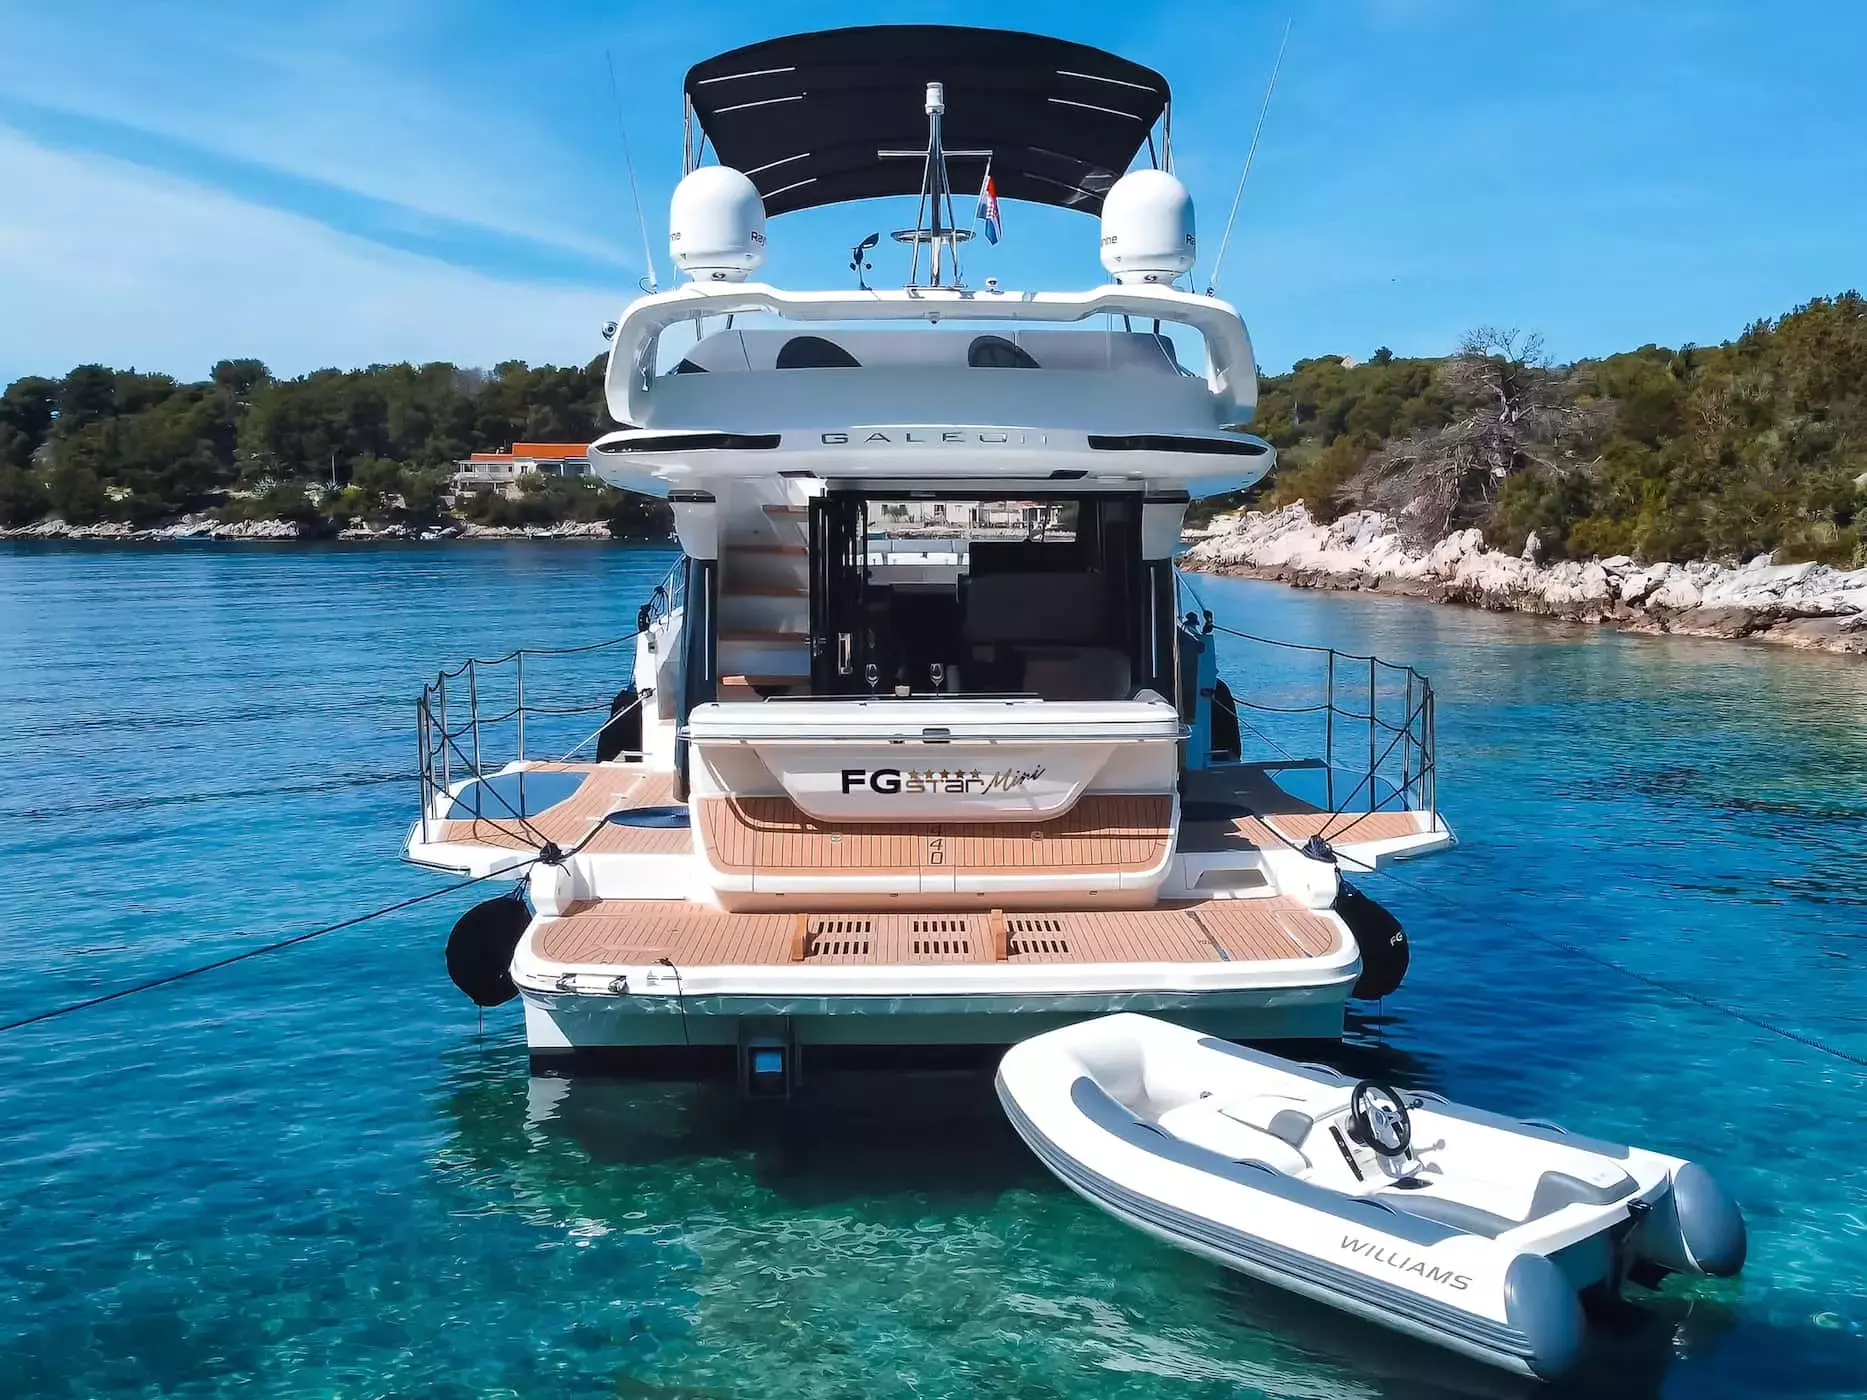 FG Star mini by Galeon - Special Offer for a private Motor Yacht Charter in Krk with a crew